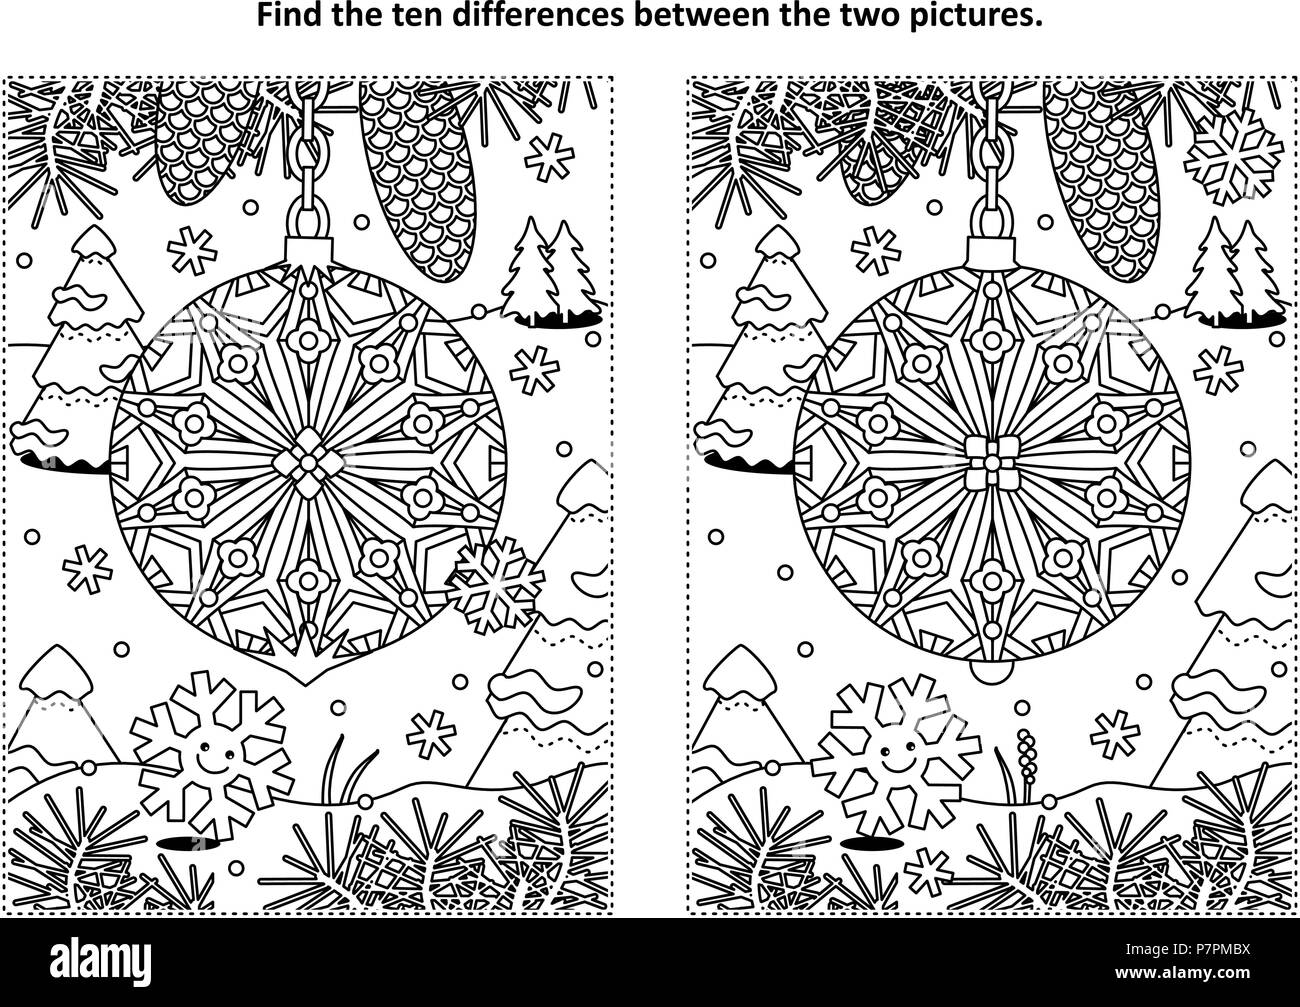 spot-the-difference-puzzle-black-and-white-stock-photos-images-alamy